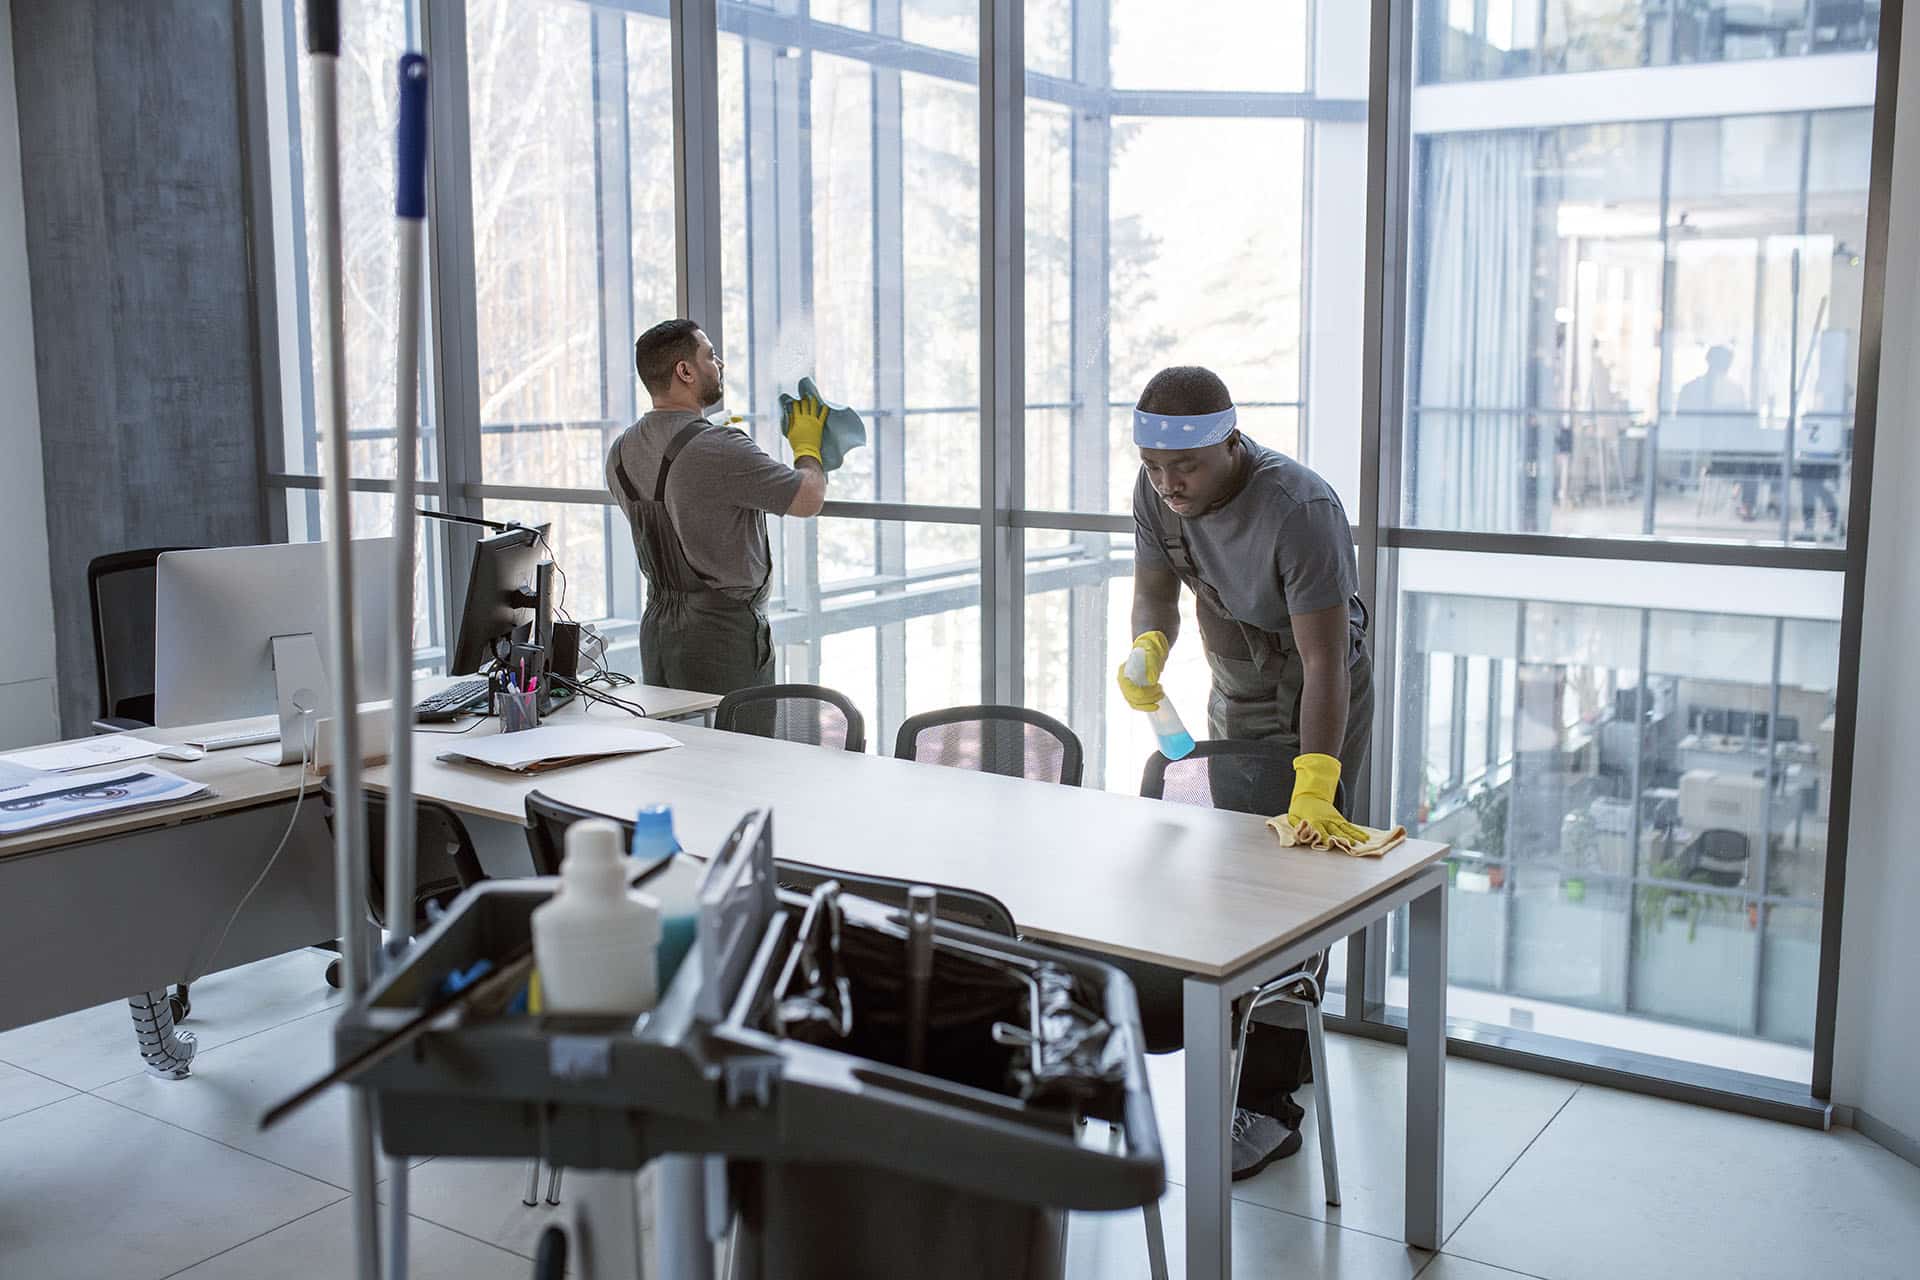 calgary commercial cleaning